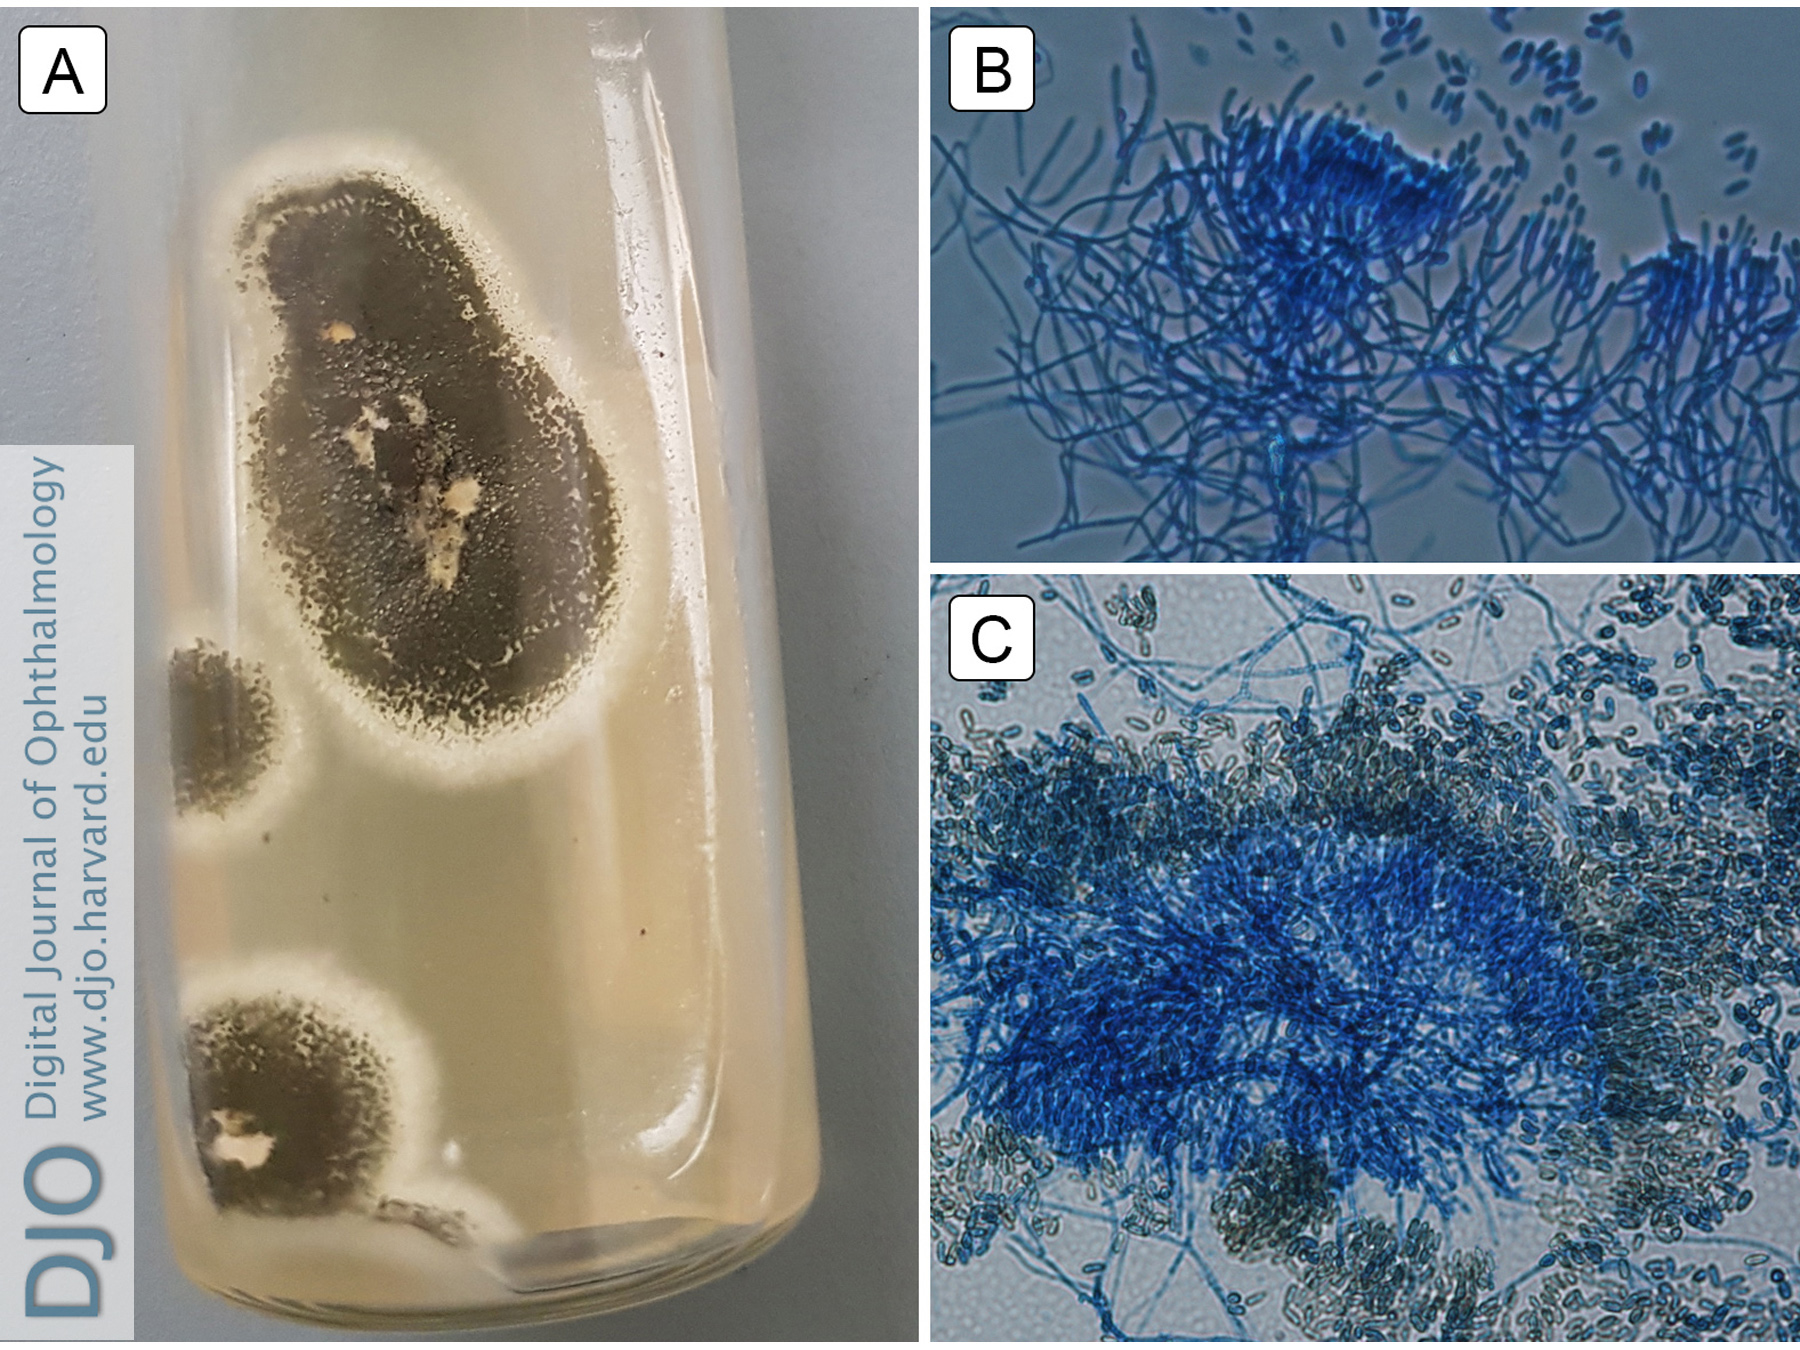 Metarhizium anisopliae strain isolated in the present case. A, Olivaceous-green colonies grown on potato dextrose agar at 25° C for 10 days. B, Specialized fungal stalks (conidiophores) aggregated in dense tufts with verticillate branching. C, Yellow-green cylindrical-shaped fungal spores (conidia), produced in long chains on conidiophores.